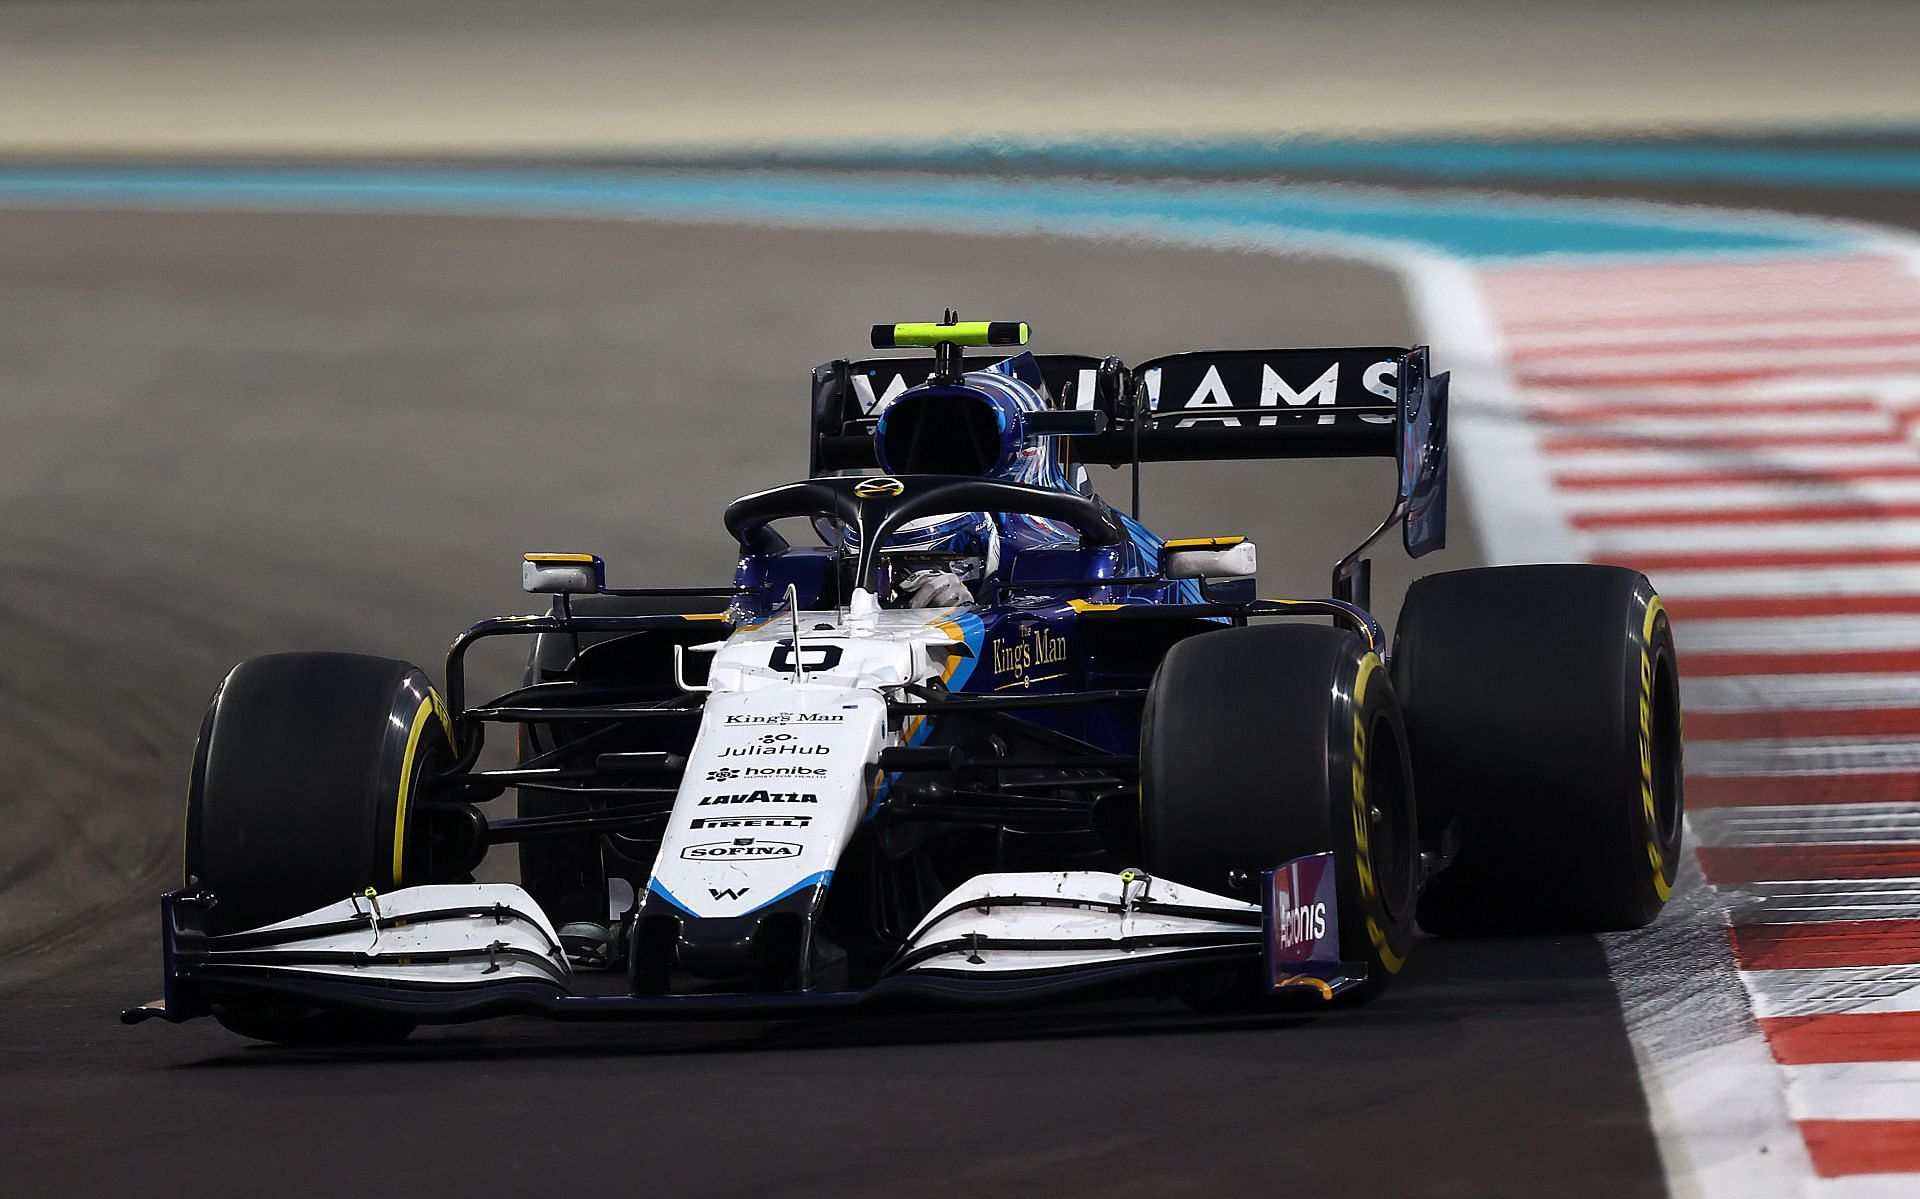 F1 Grand Prix of Abu Dhabi - Williams improved their form in 2021